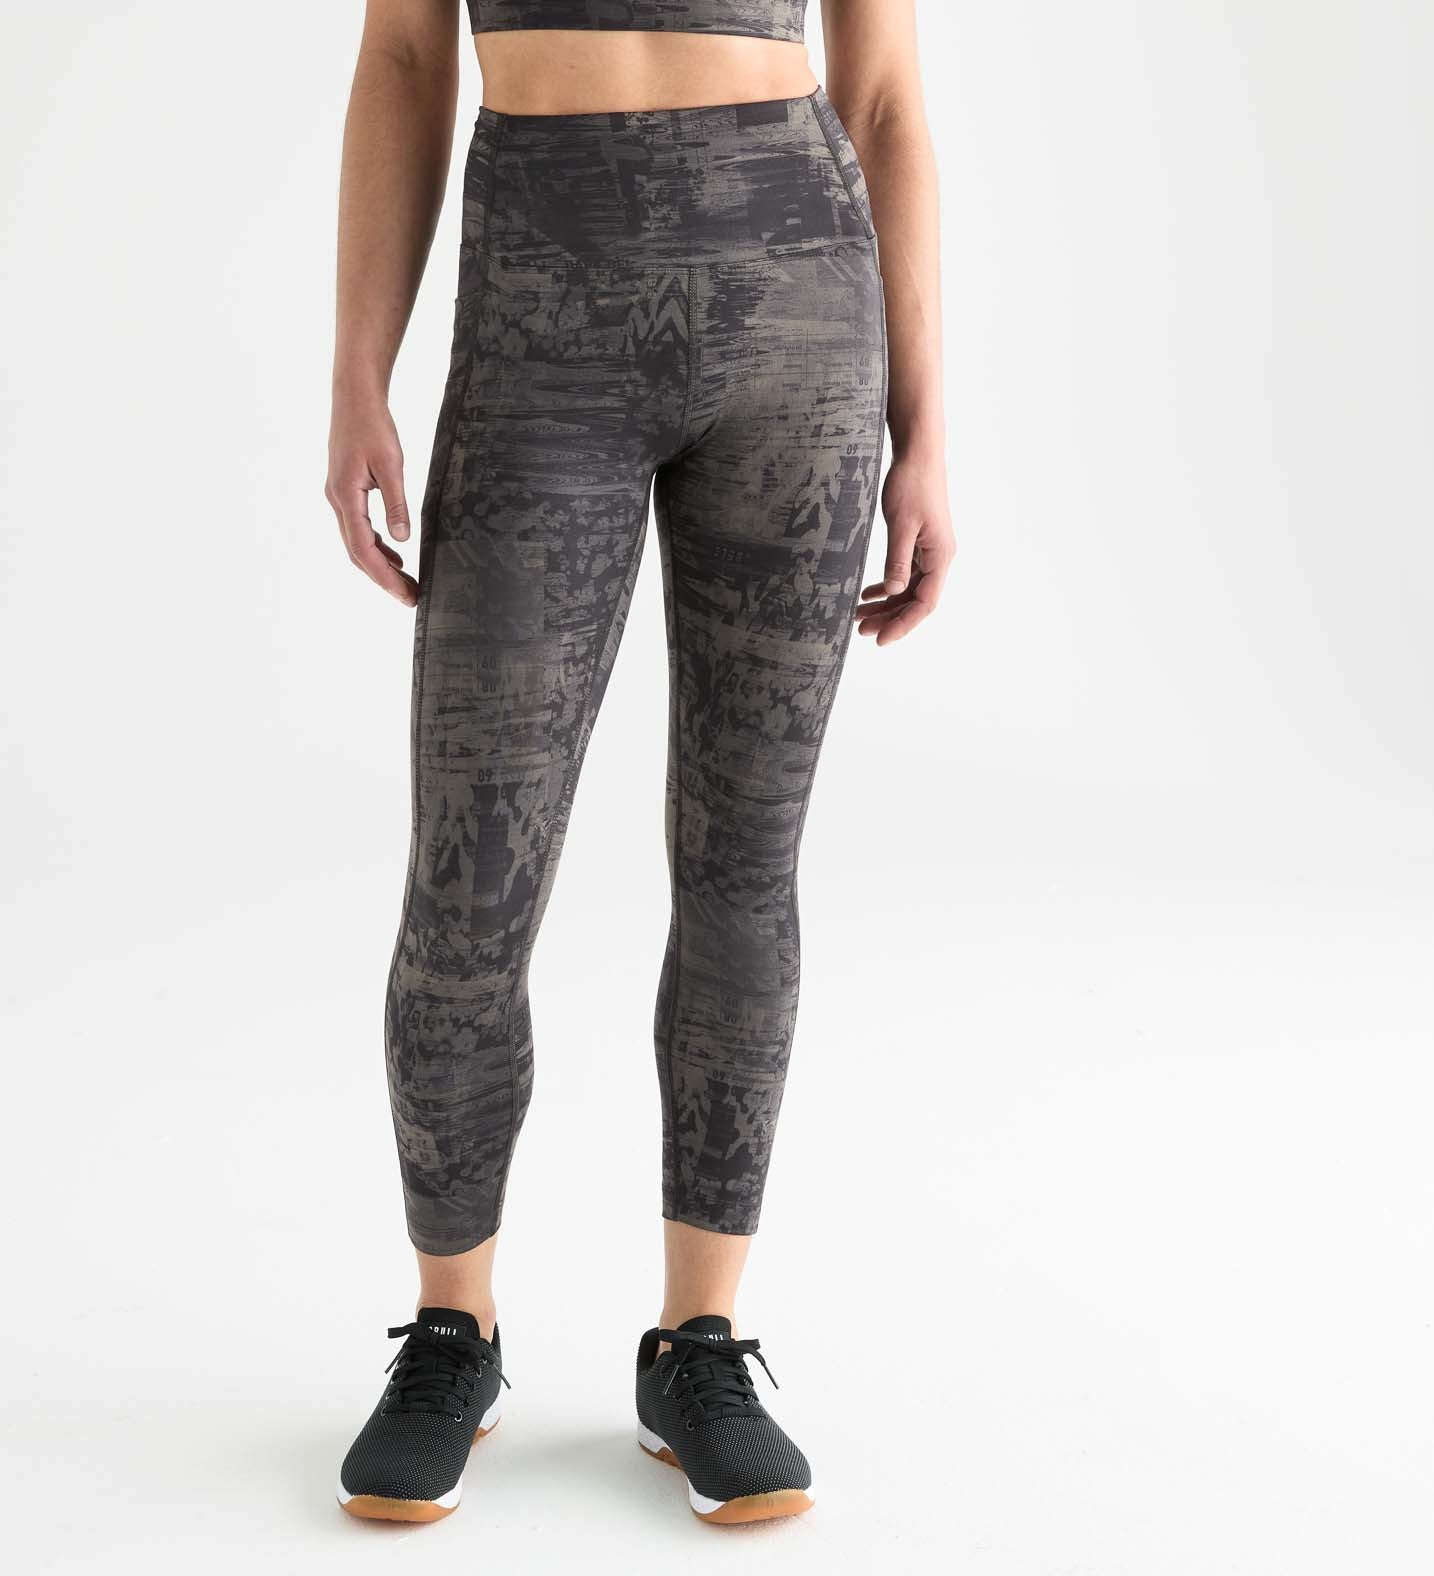 Lululemon Black Camo Fast Free HR Crop 19 Tight Fitted Leggings NWT Size 6